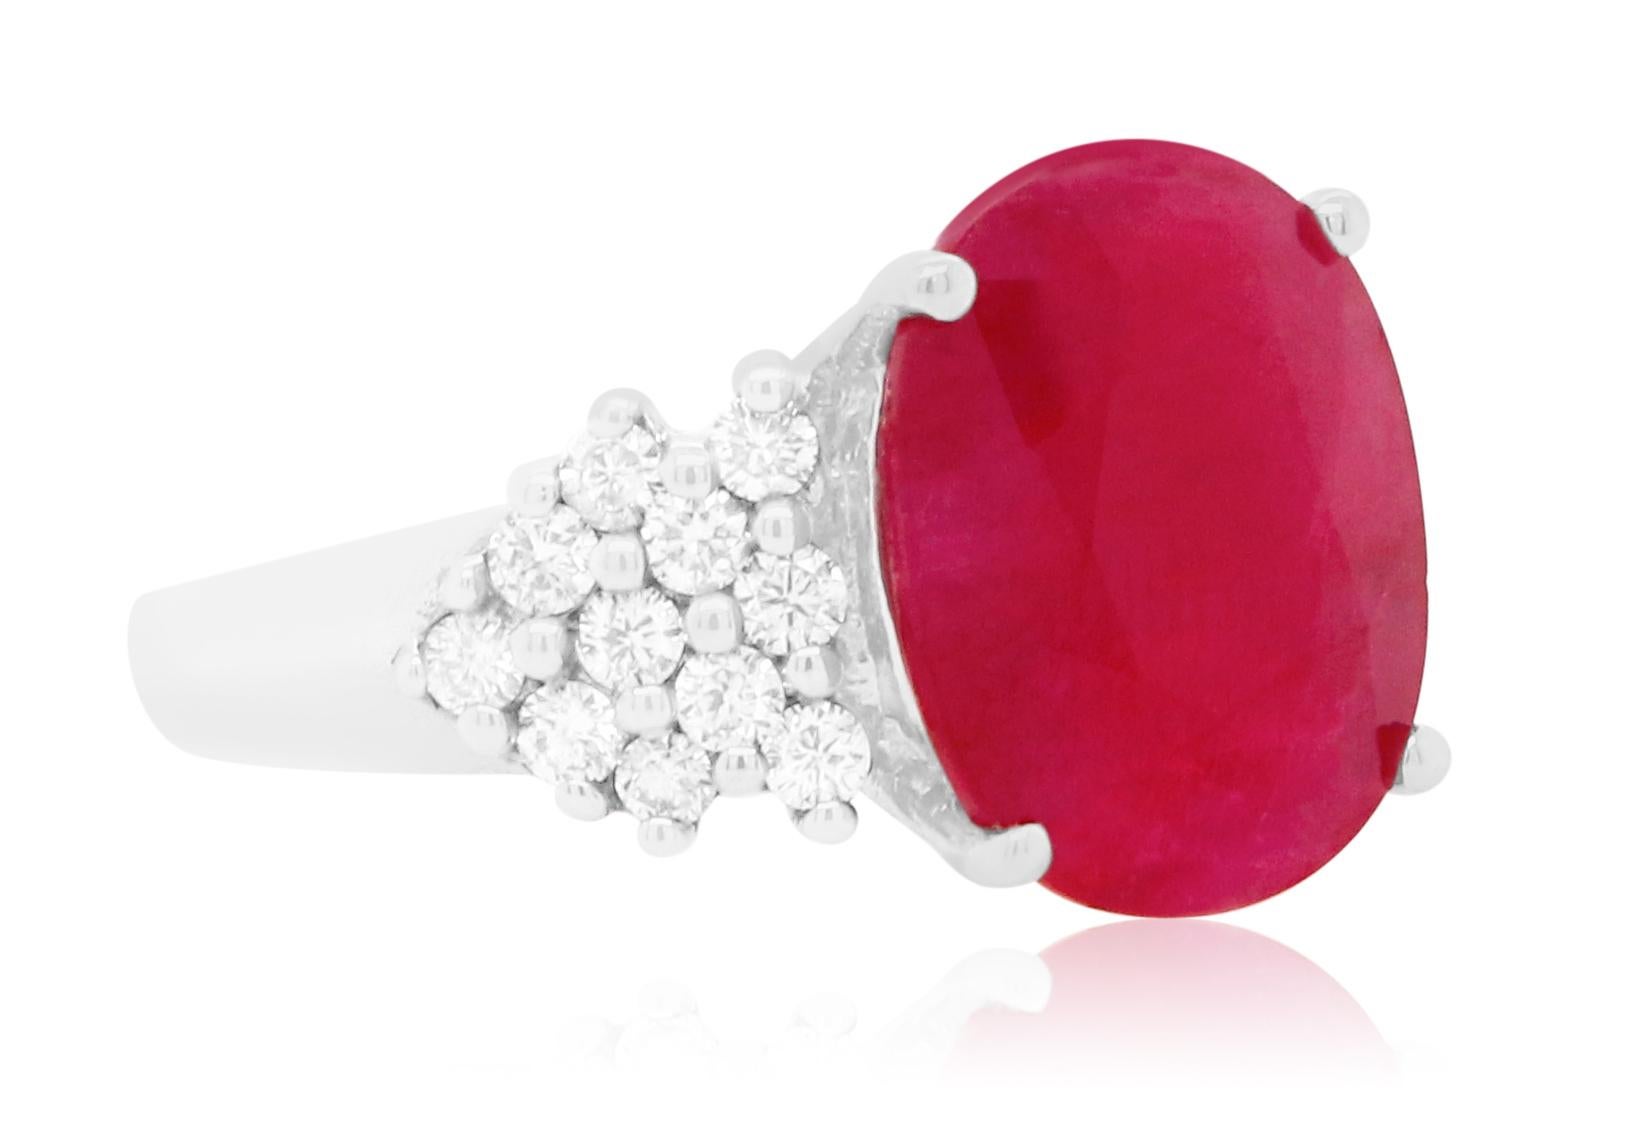 Material: 14k White Gold 
Center Stone Details: 5.76 Carat Oval Ruby measuring 13 x 10.5 mm
Mounting Diamond Details: 22 Brilliant Round White Diamonds at 0.54 Carats - Clarity: SI / Color: H-I
Complimentary sizing on all Alberto rings

Fine